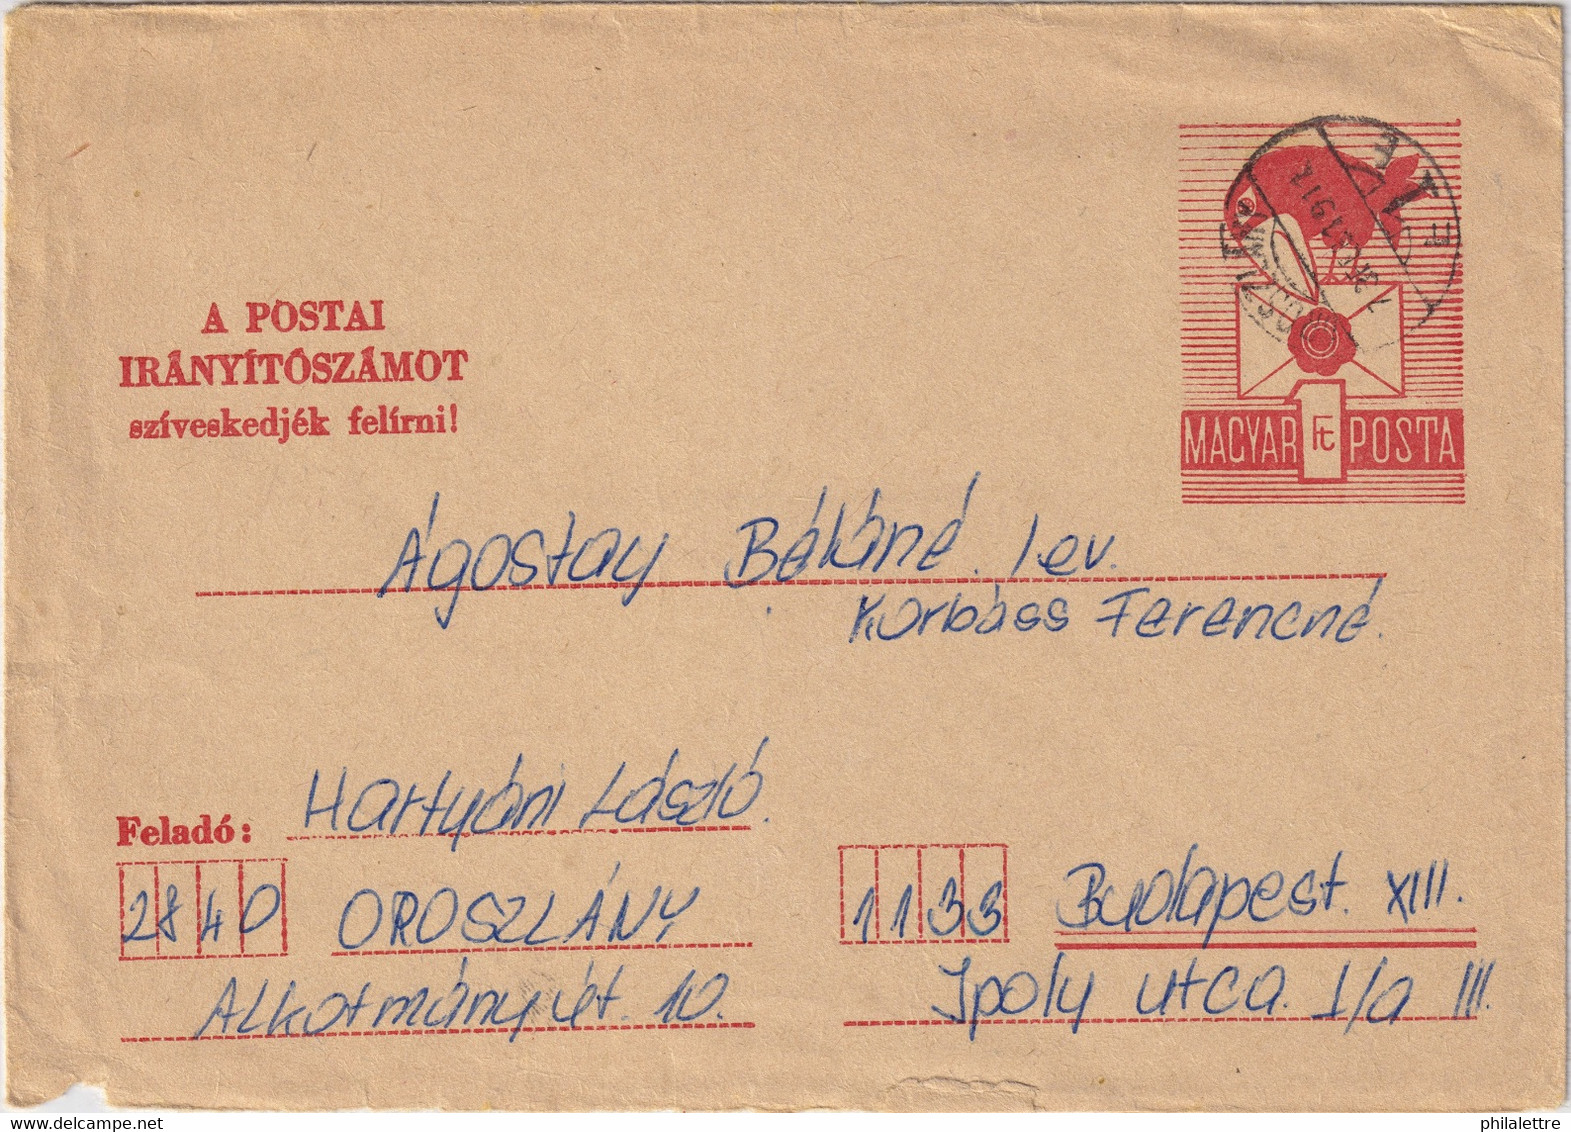 HUNGARY - 1972 1Ft Crow Type I Postal Envelope Mi.U38a - Used In OROSZLÁNY - Covers & Documents